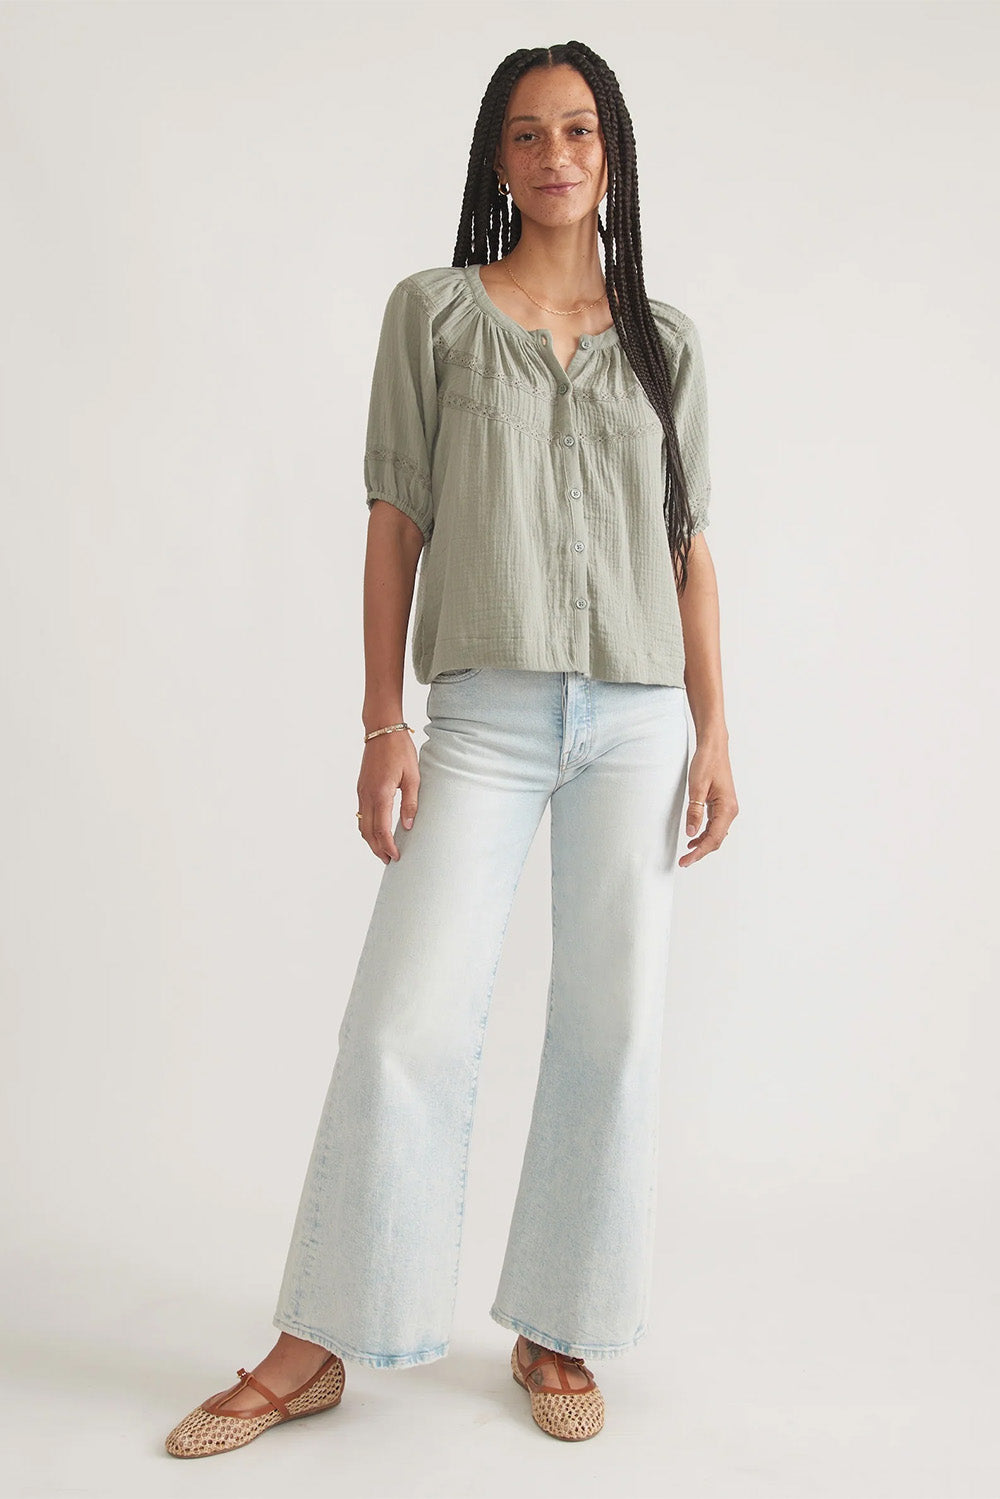 Marine Layer - Wren Puff Sleeve Top - Faded Olive